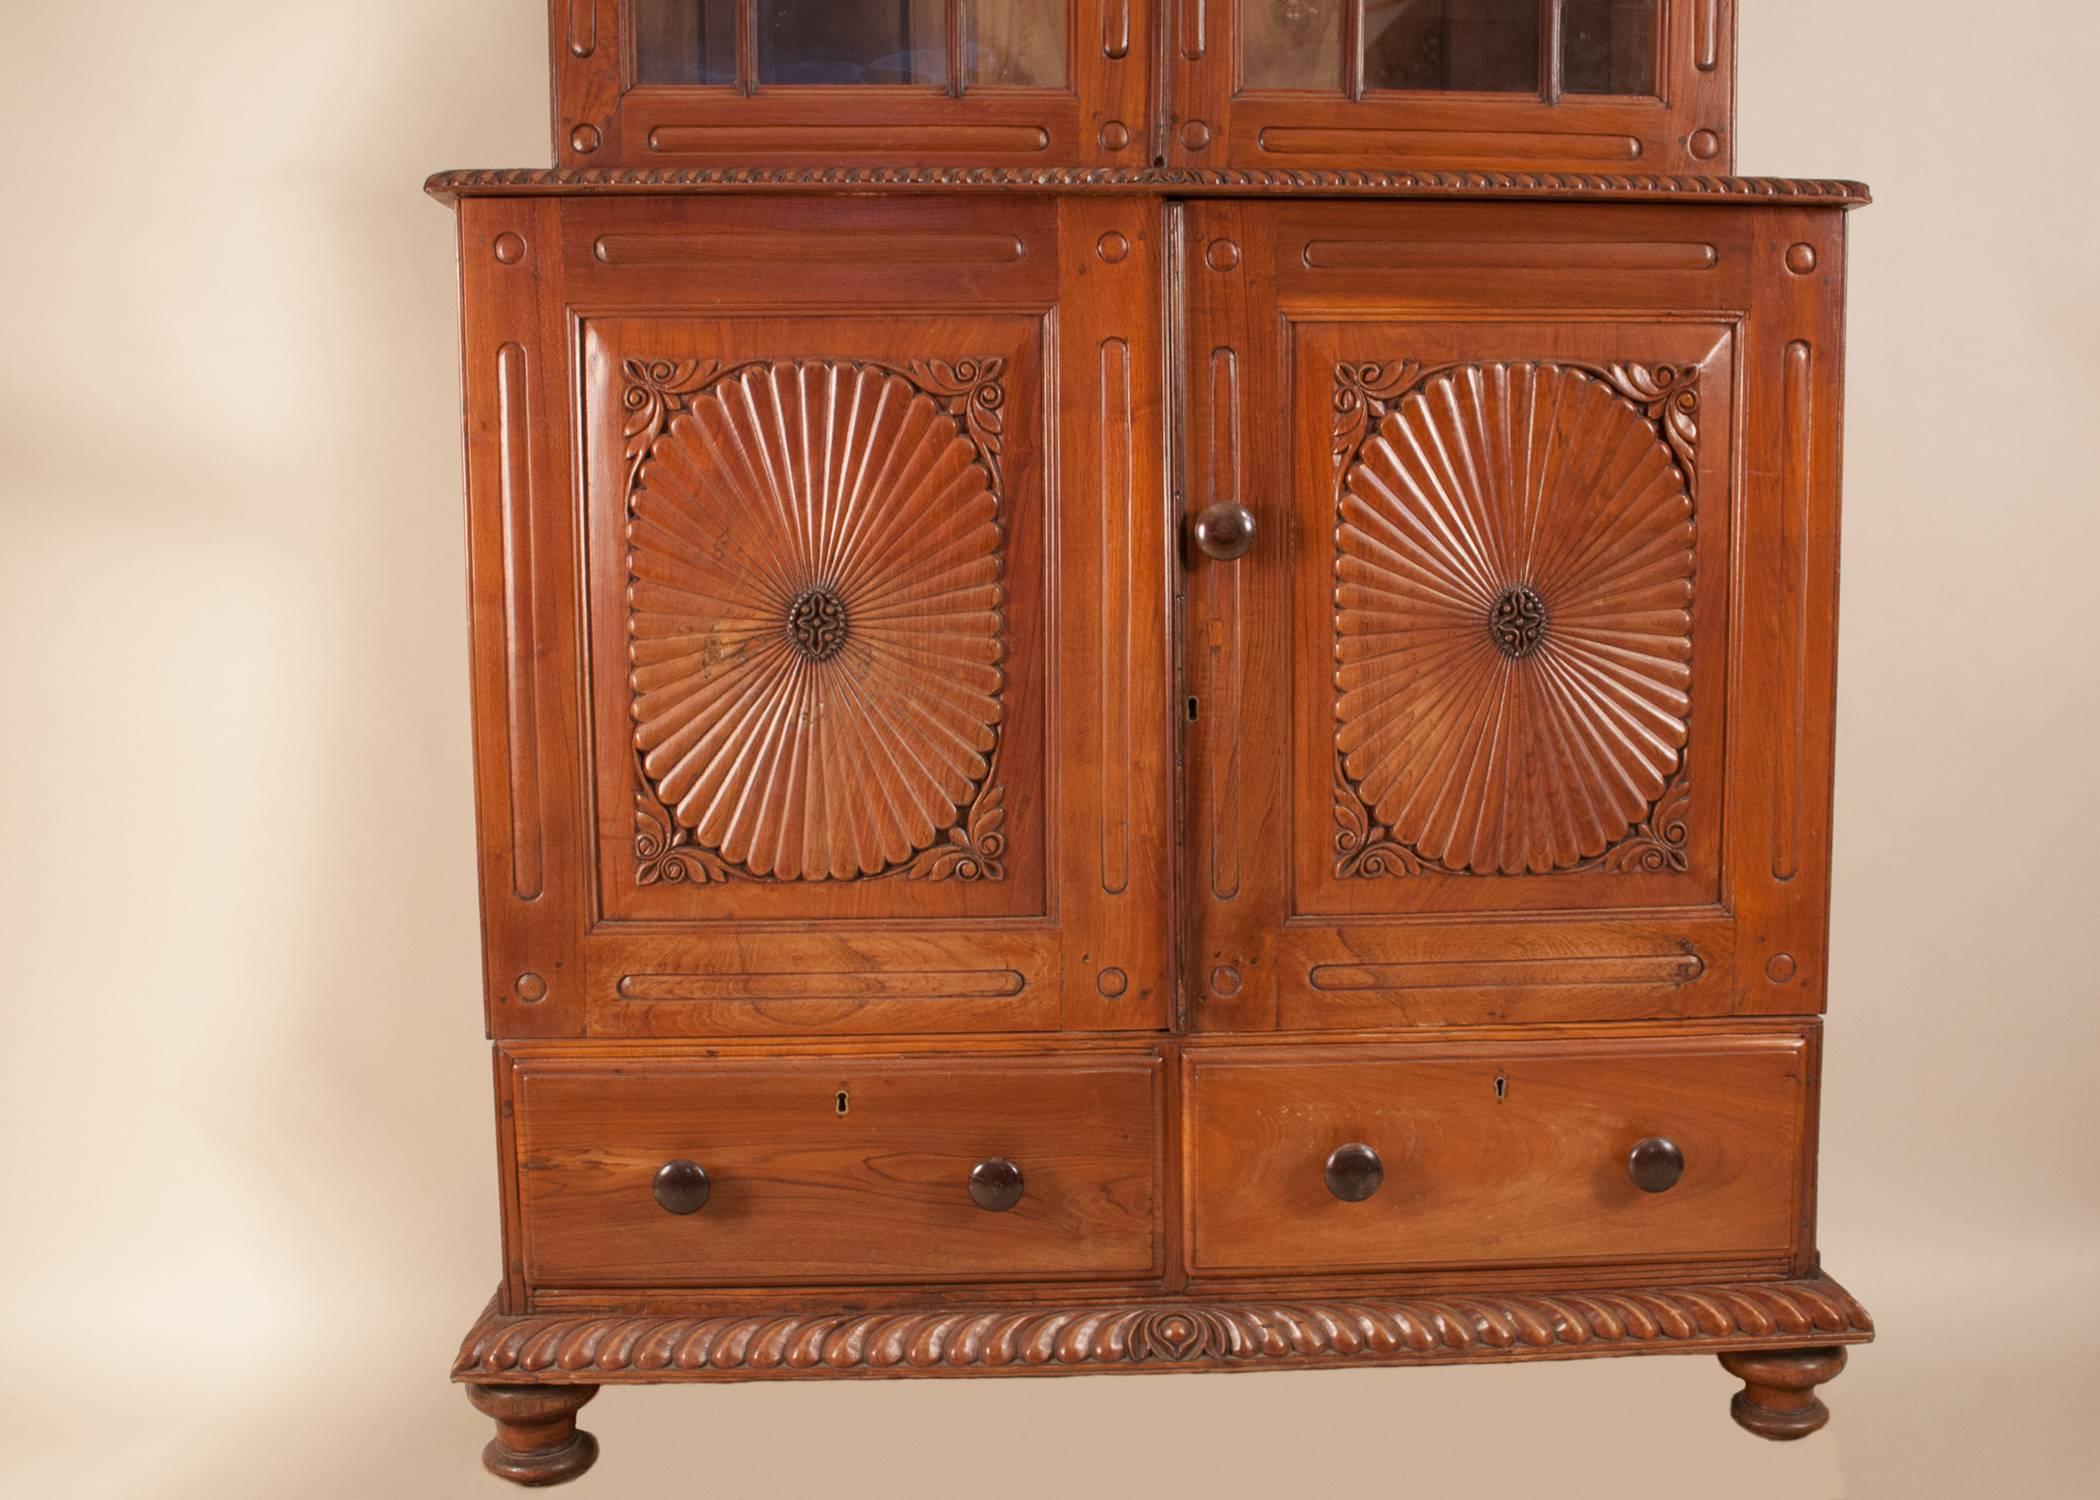 Carved British Colonial Teak Wood China Cabinet Hutch